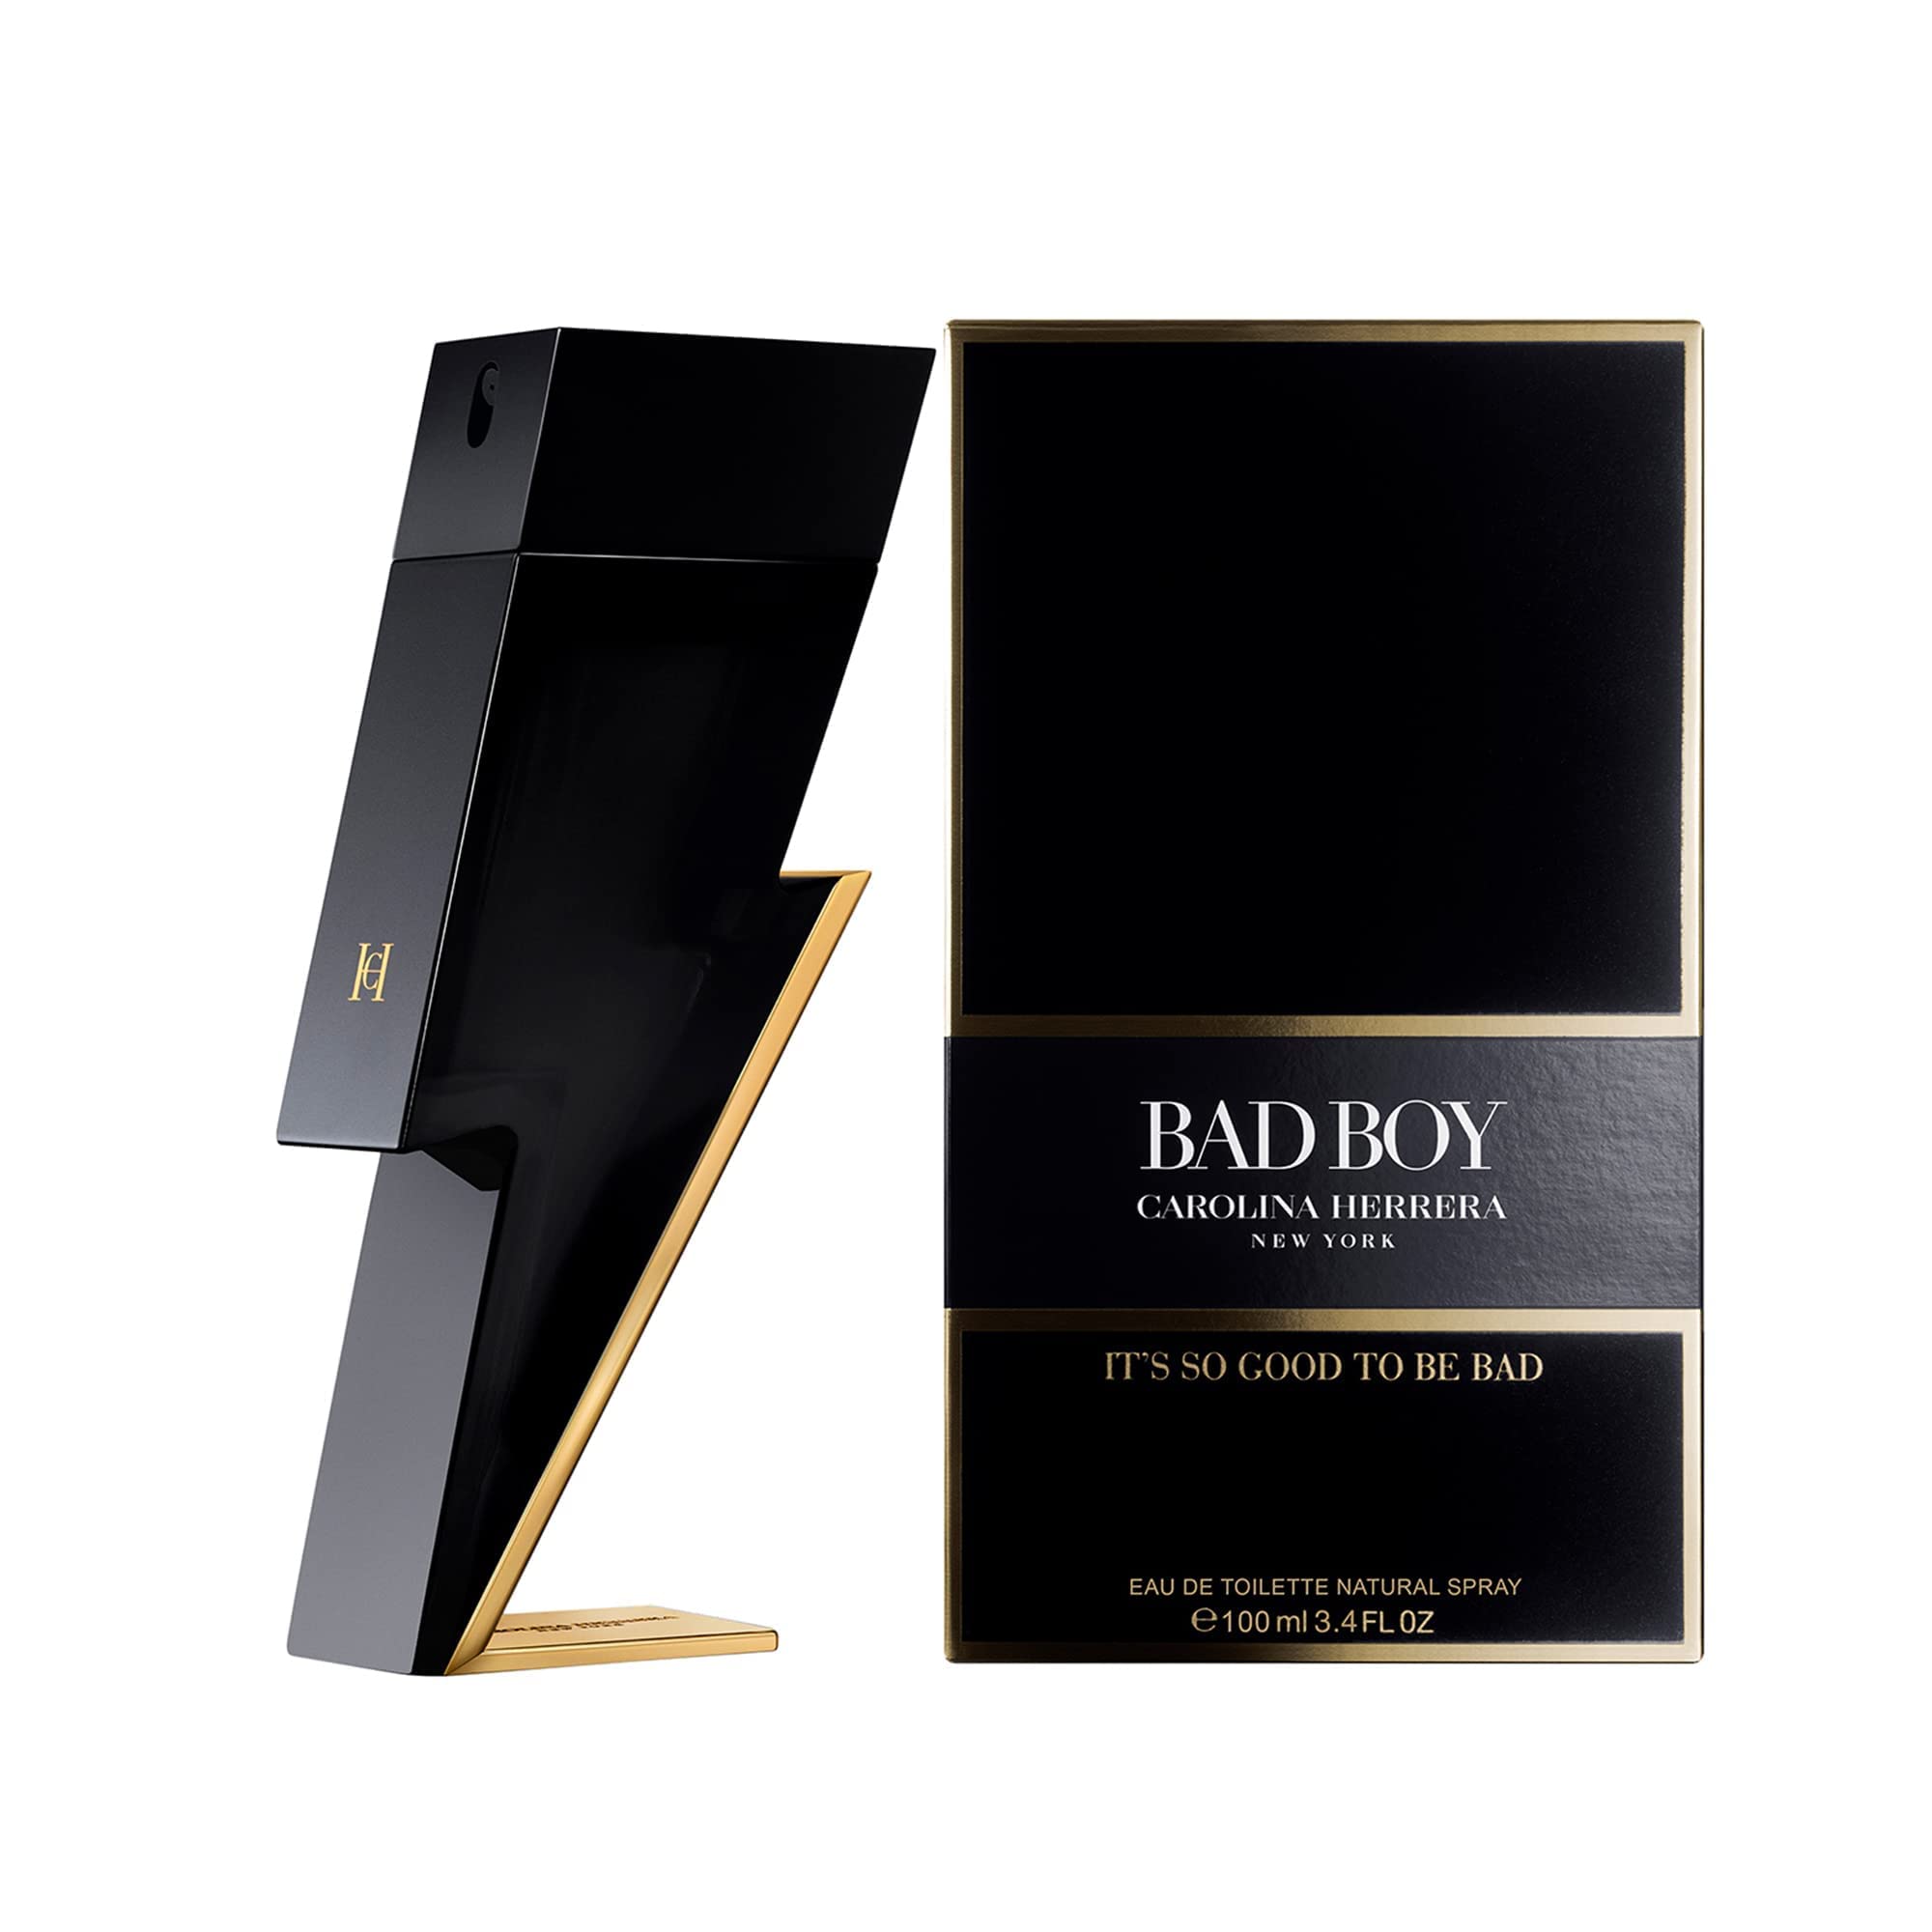 Carolina Herrera Bad Boy Fragrance For Men - Seductive, Masculine Scent - Features Oriental And Spicy Accords - Ideal For Evening Wear - Alluring Notes Of Black And White Pepper - Edt Spray - 3.4 Oz